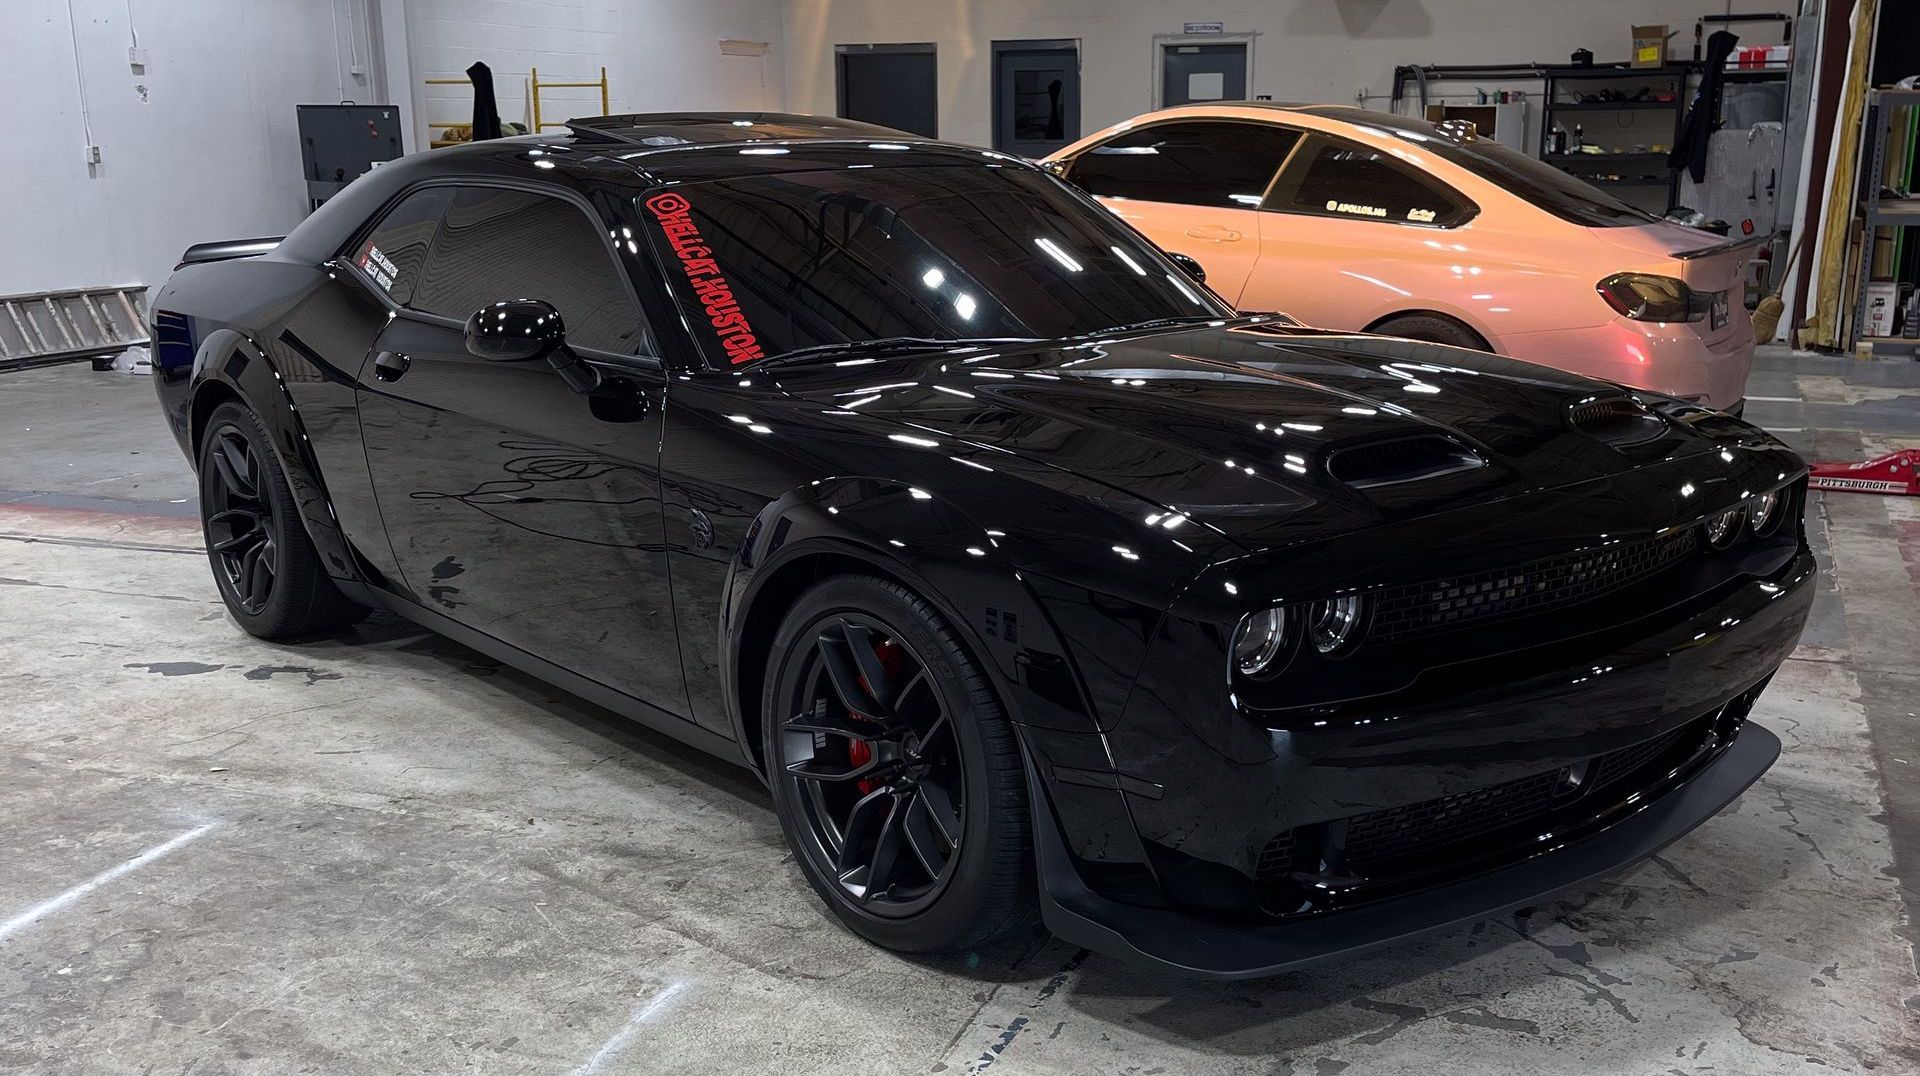 a black dodge challenger is parked in a garage next to a white car.